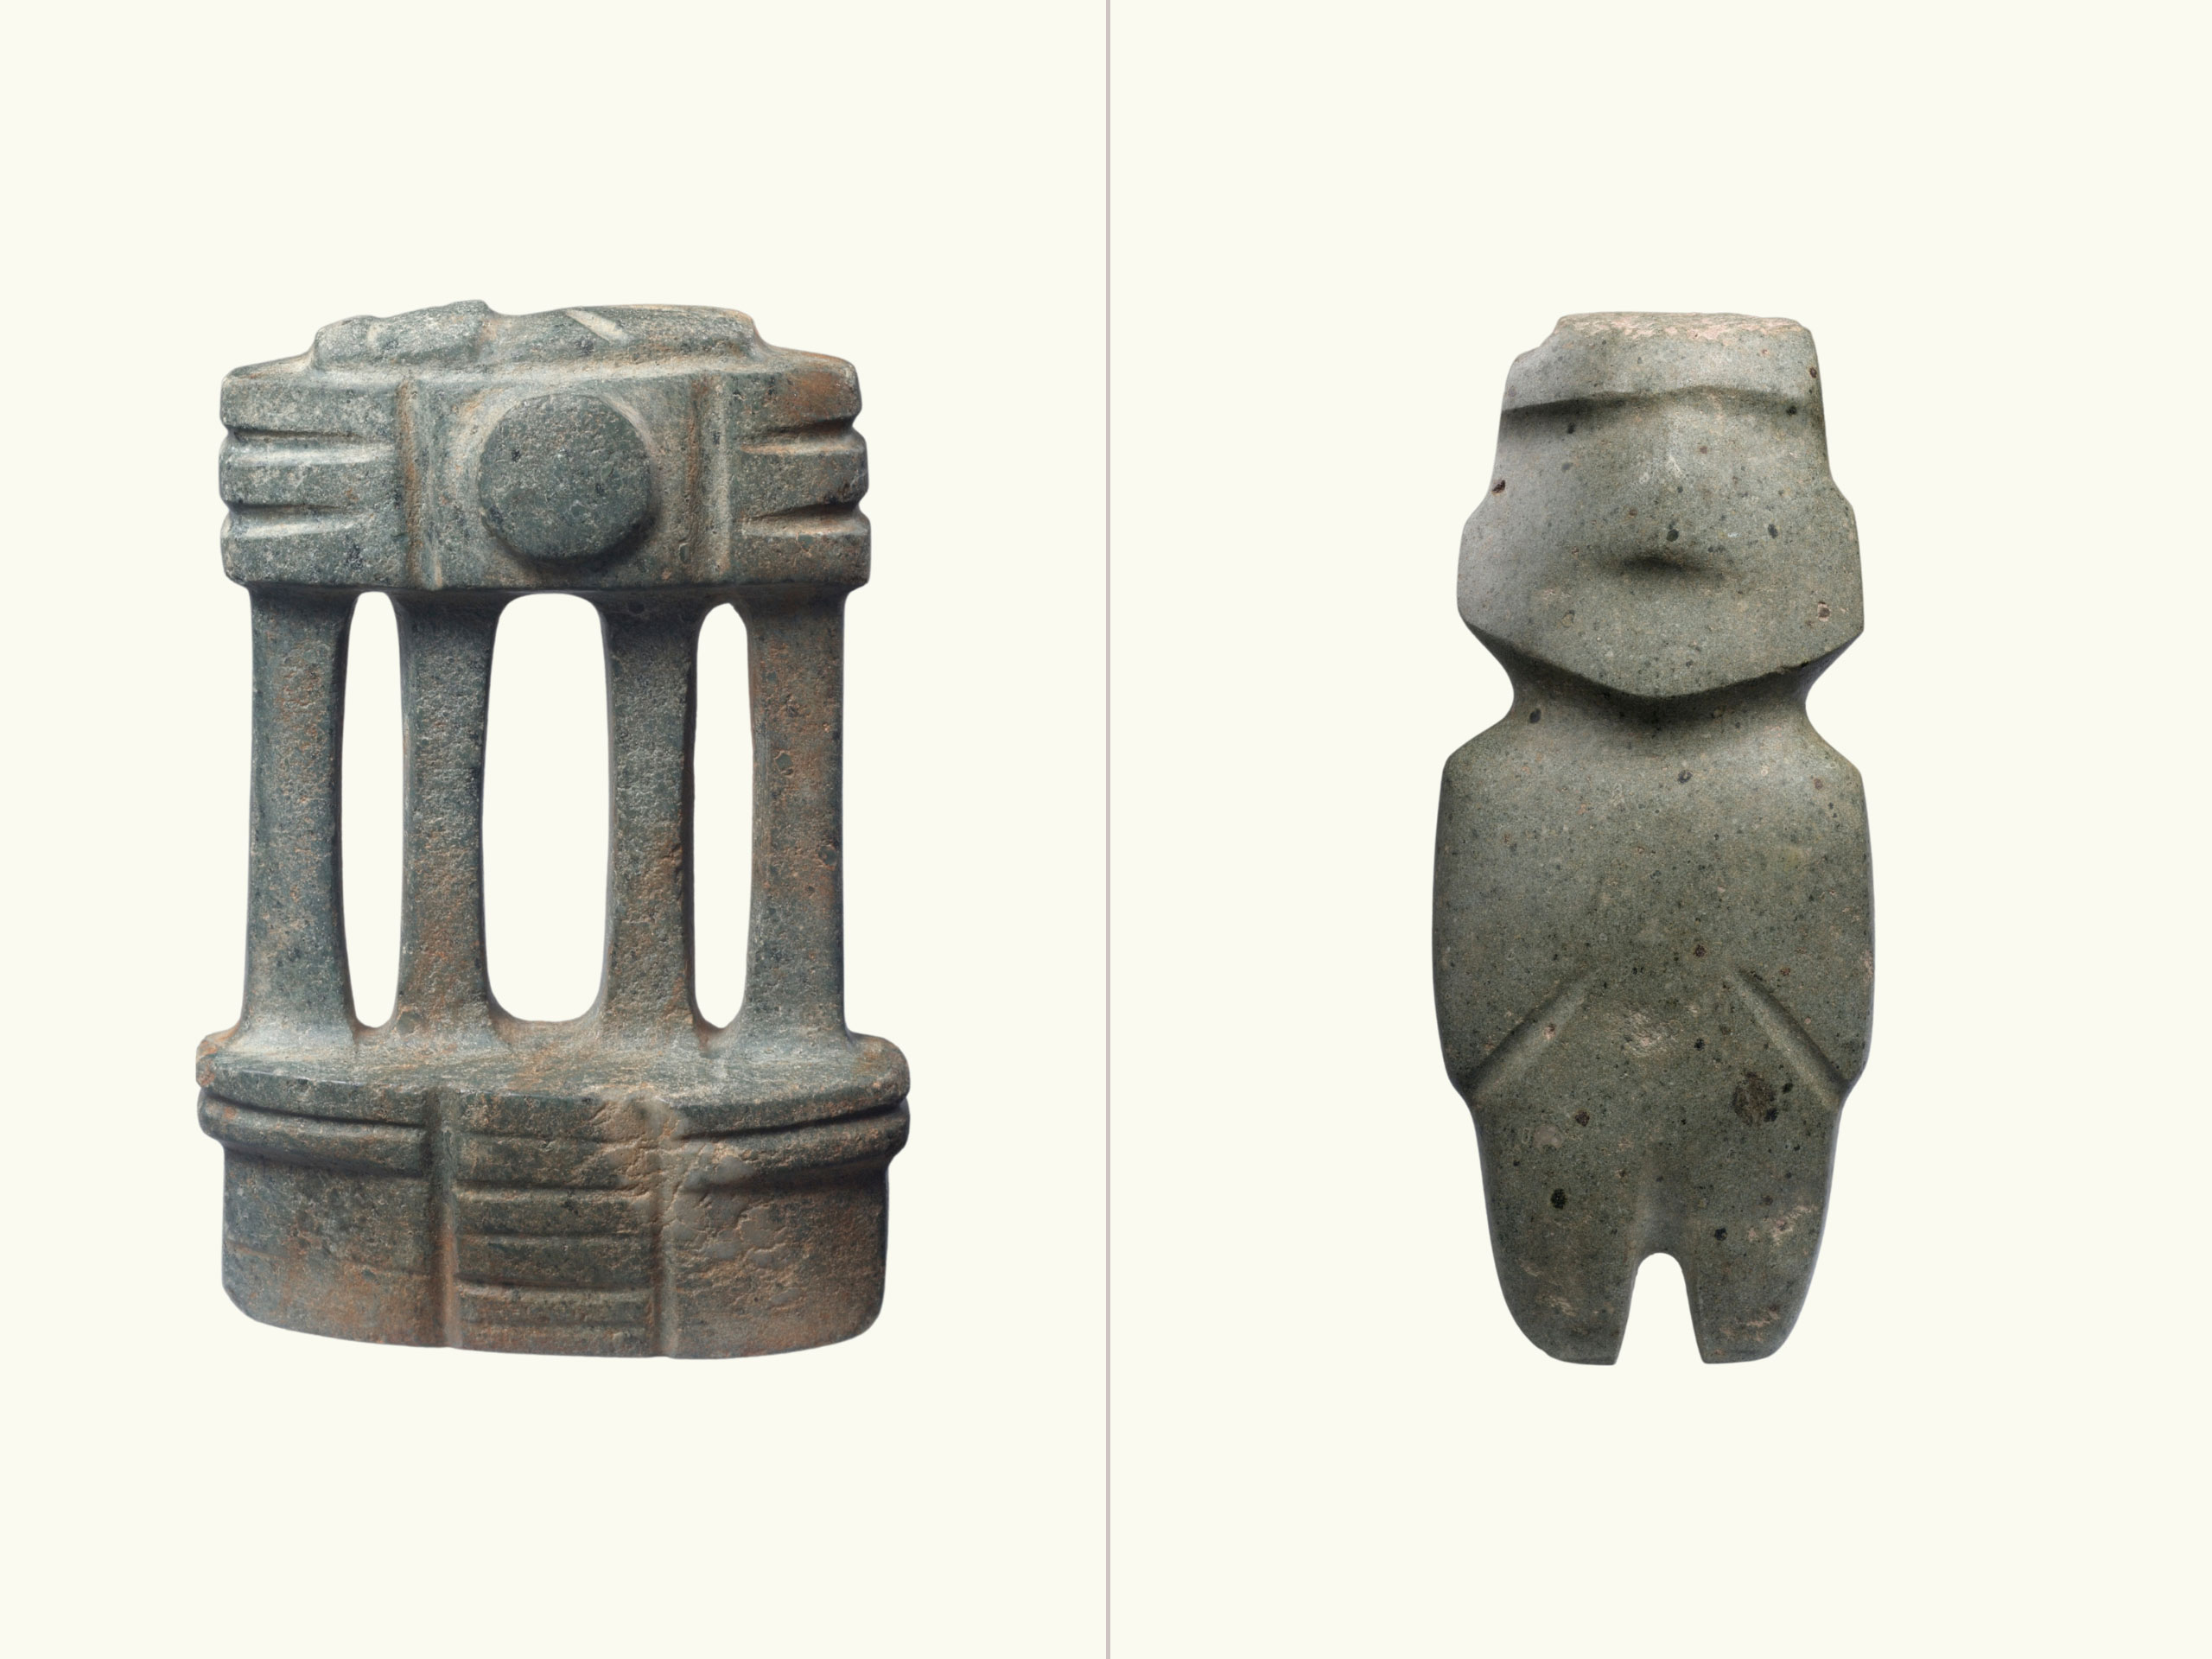 A comparison of two objects: a 4 column temple in green/grey stone, and a green/grey stone standing figure with slits.